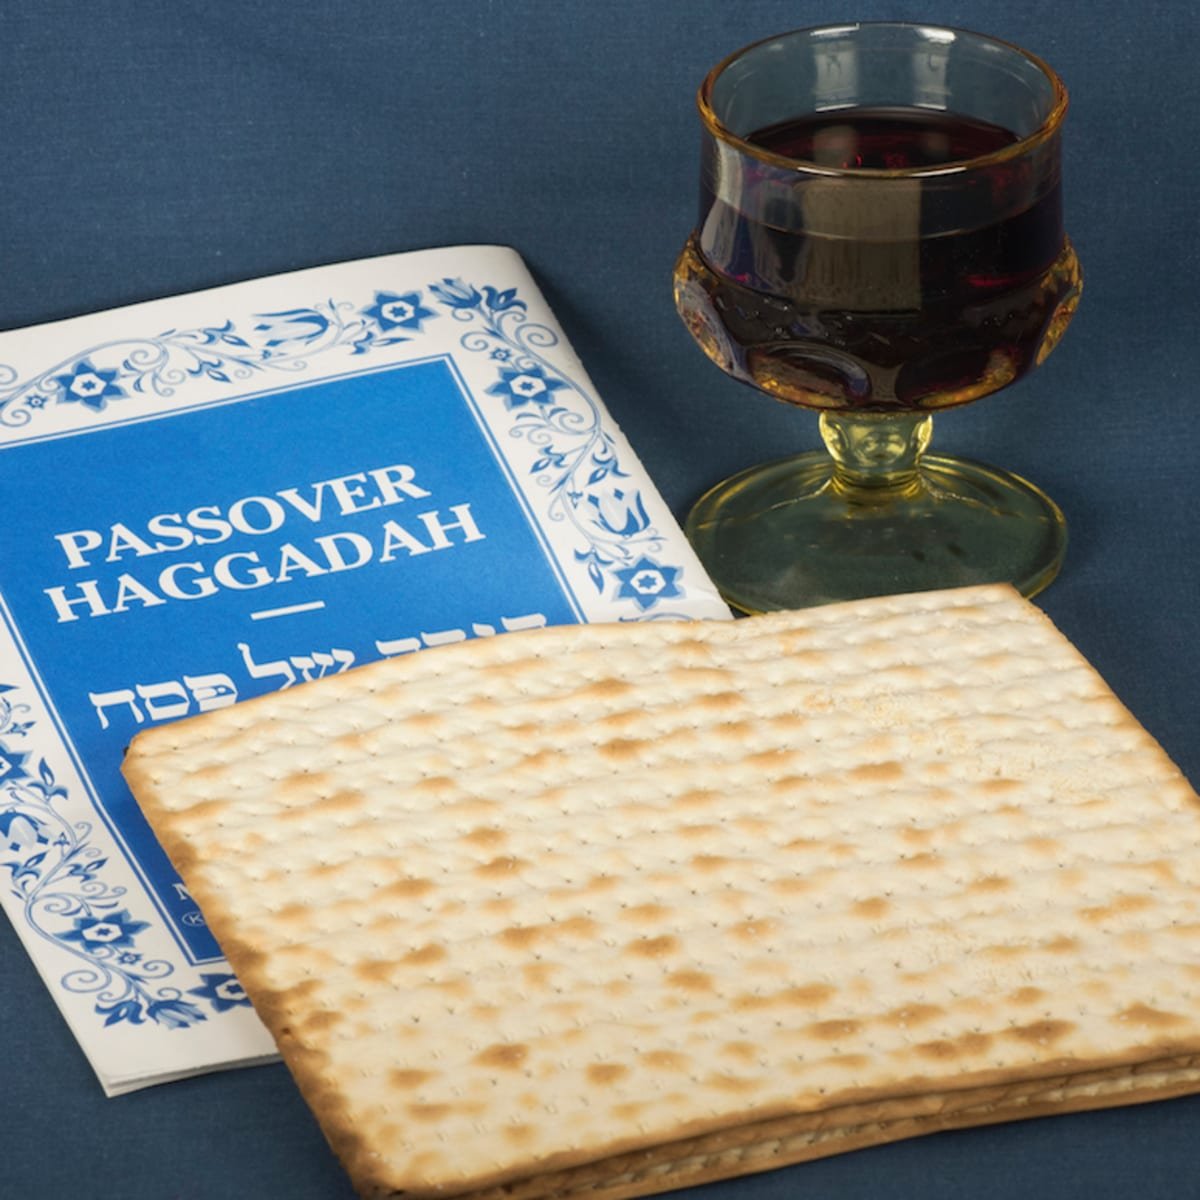 Text of the Passover Haggadah